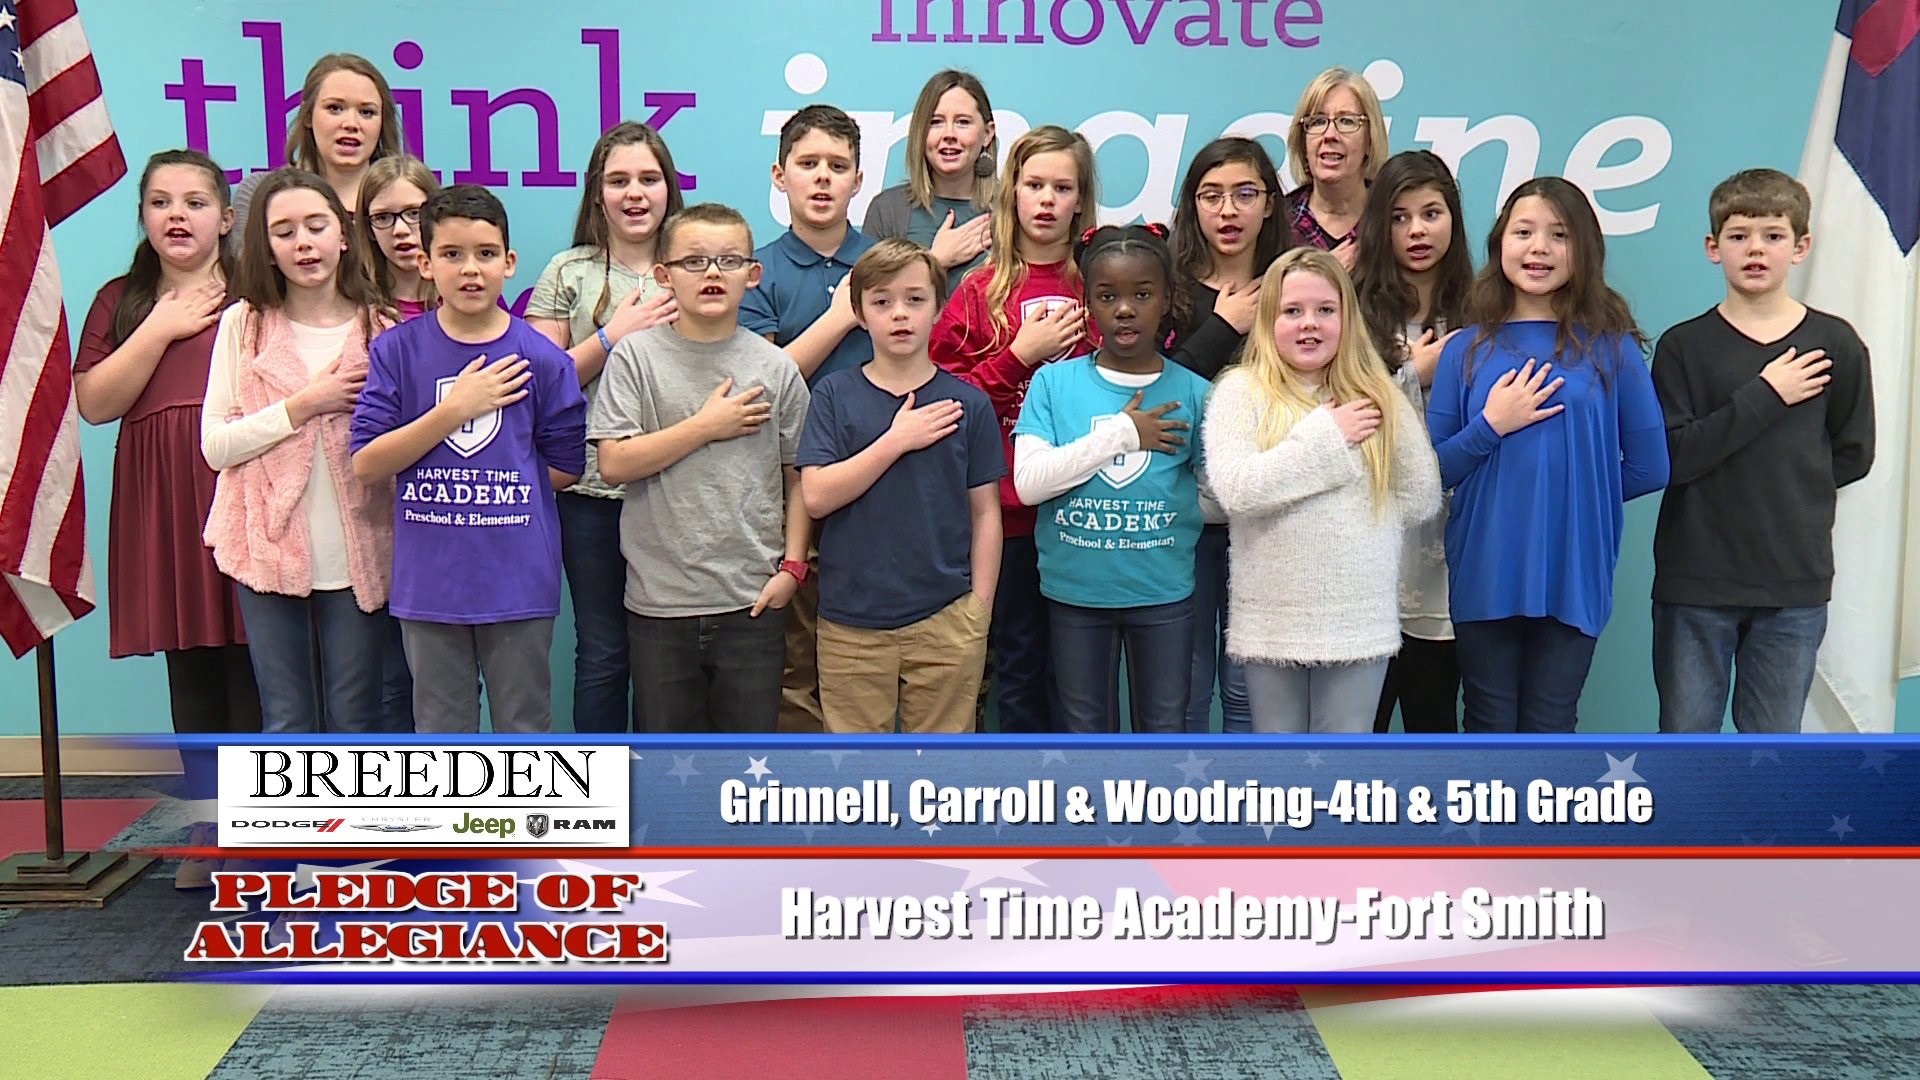 Grinnell, Carroll, & Woodring  4th & 5th Grade  Harvest Time Academy  Fort Smith